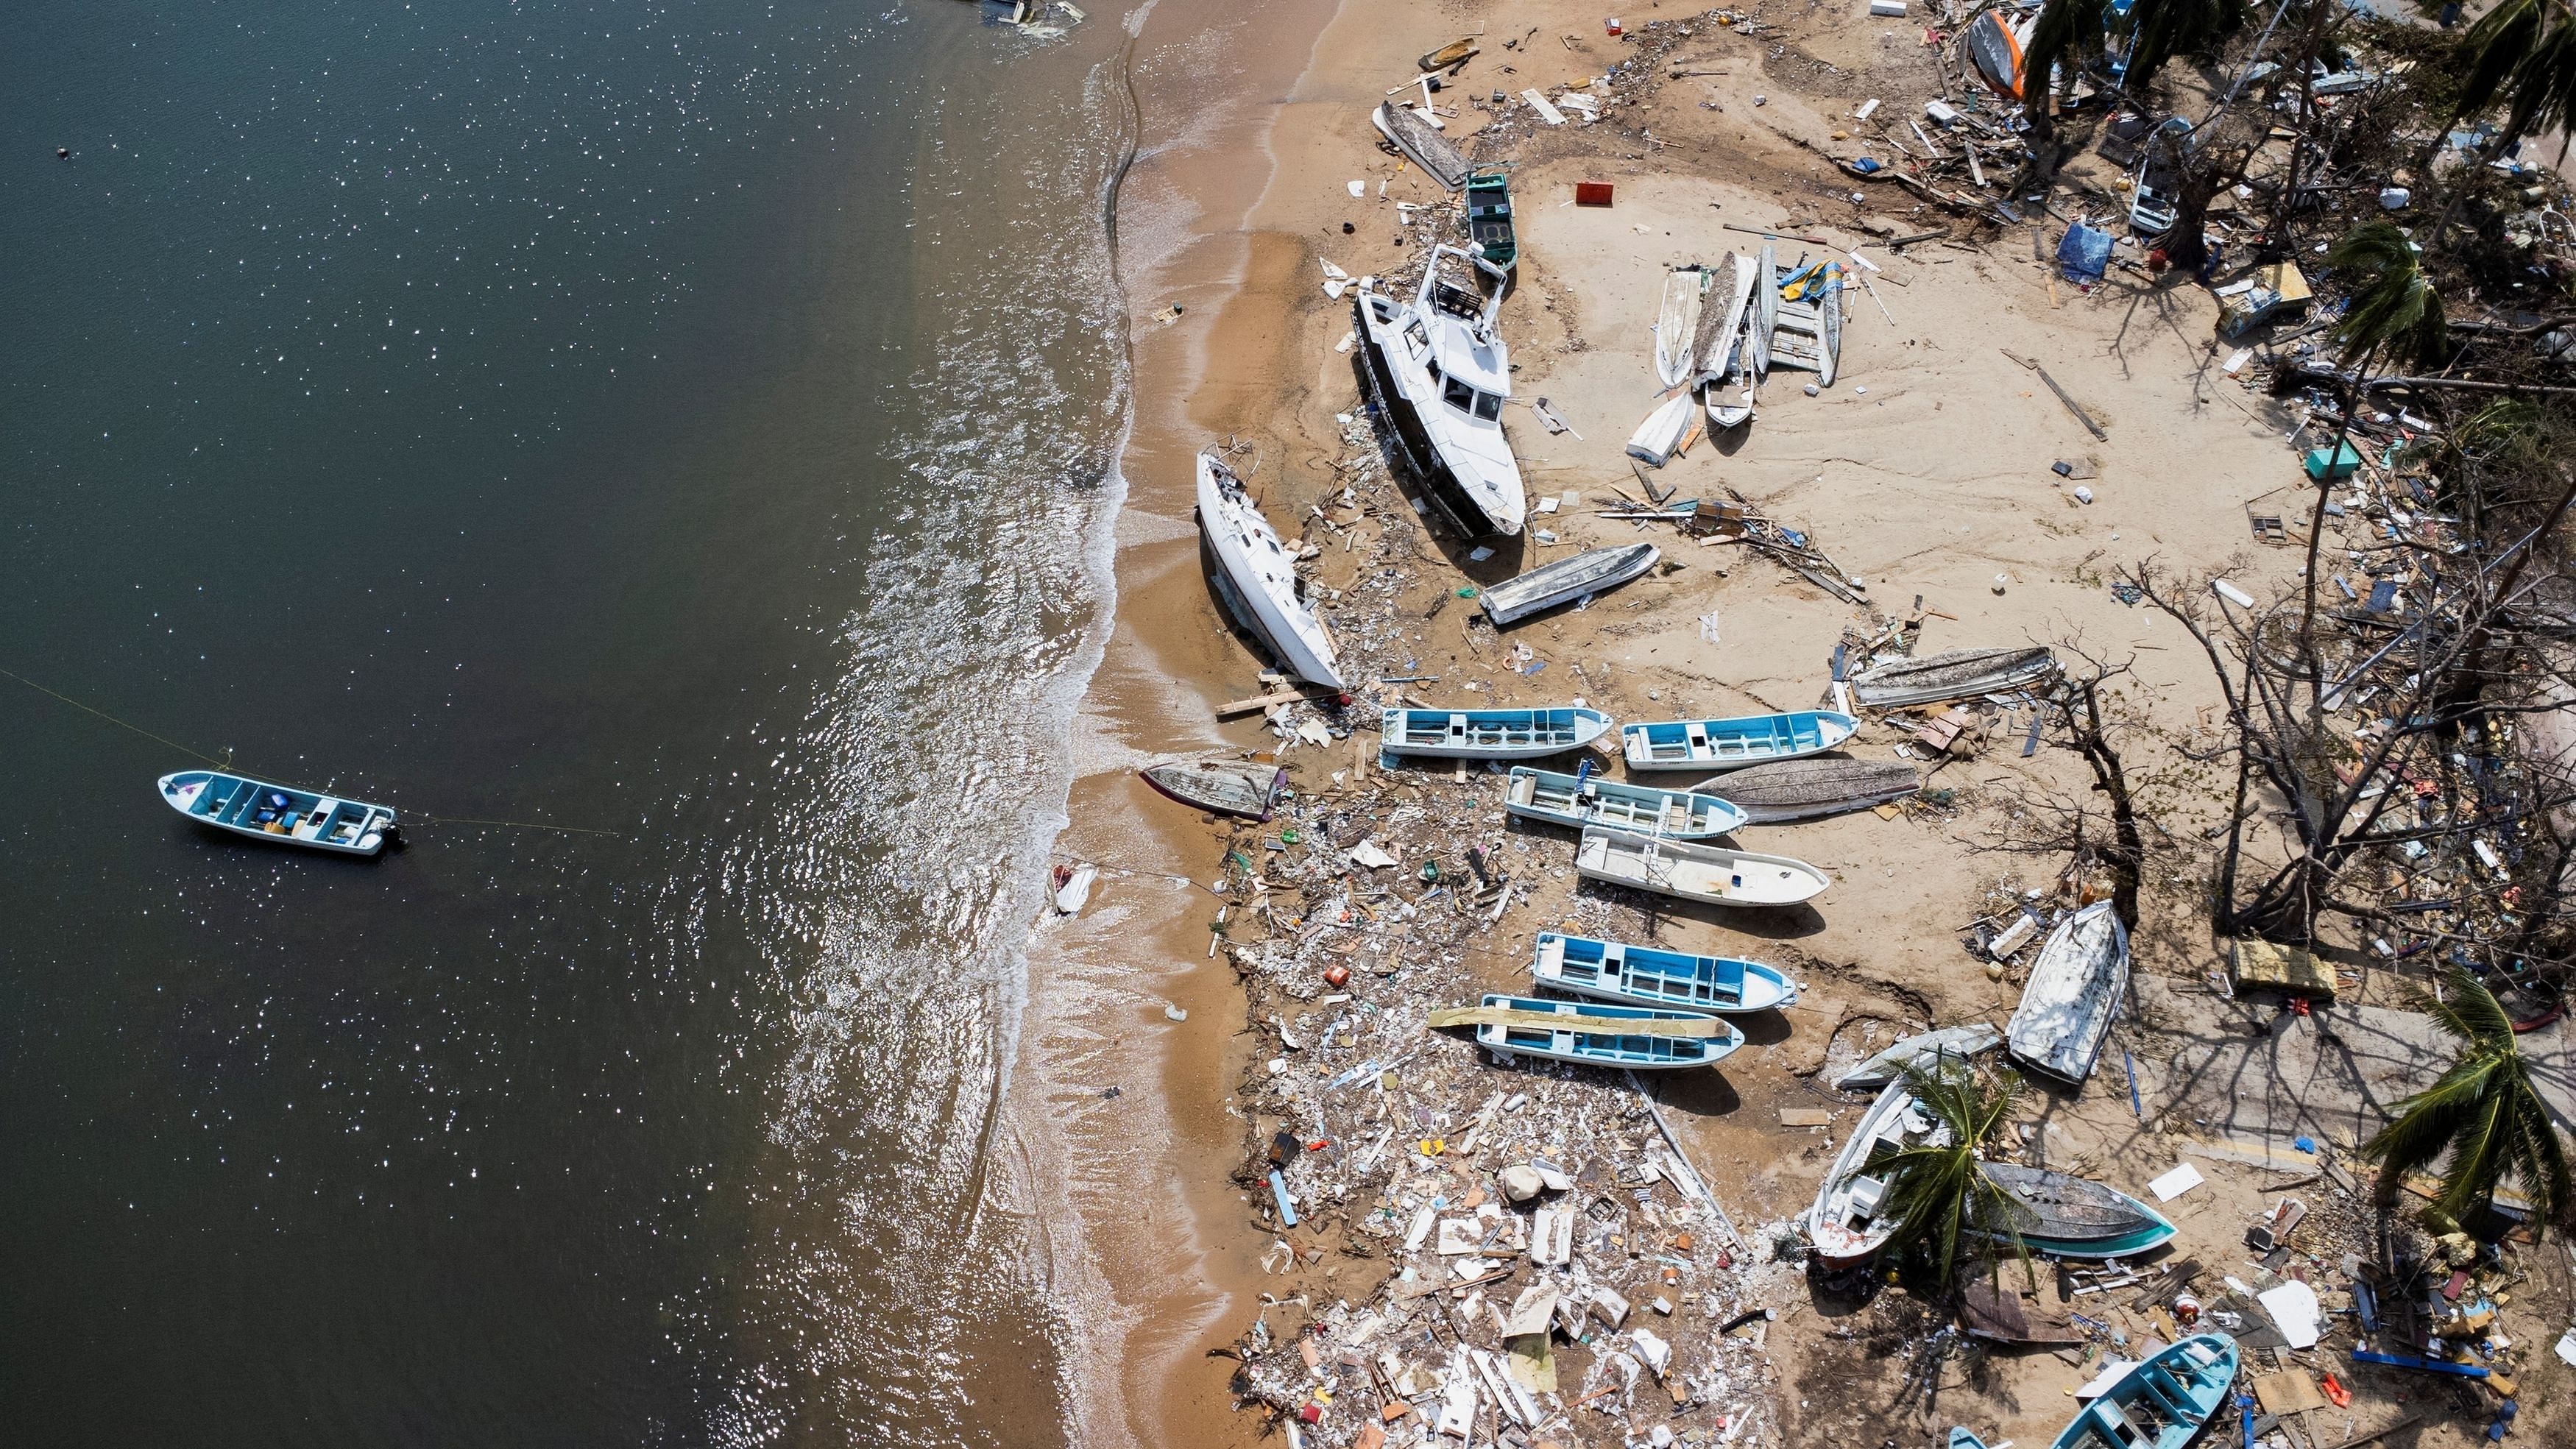 <div class="paragraphs"><p>Damaged boats are seen on a shore in the aftermath of Hurricane Otis, in Acapulco, Mexico.</p></div>